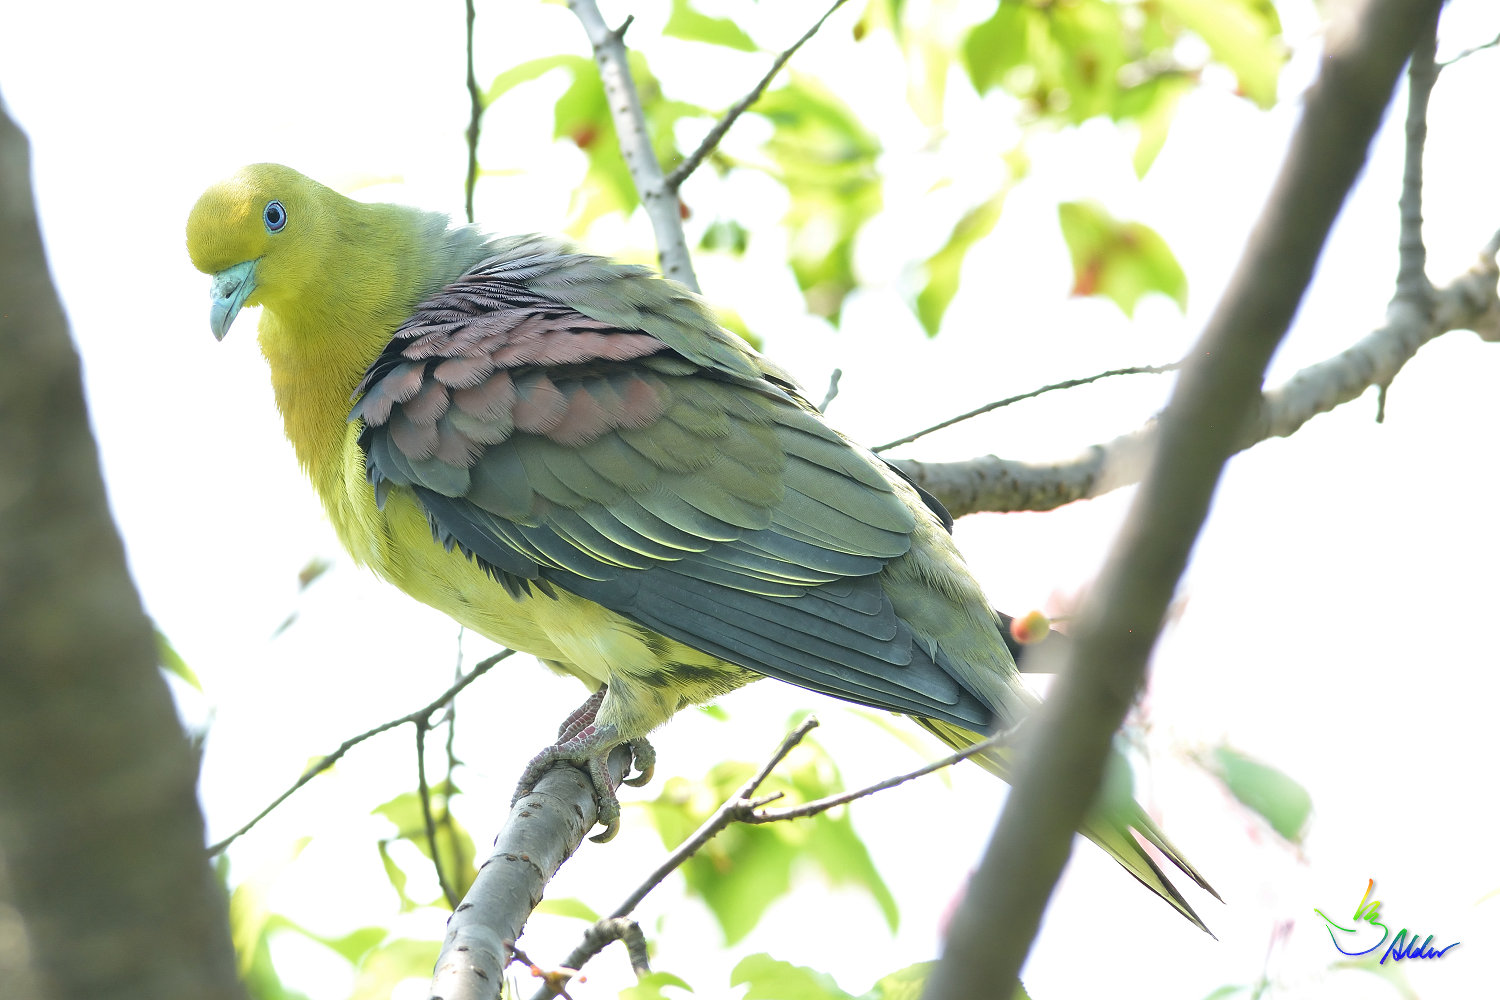 White-bellied_Green_Pigeon_5760